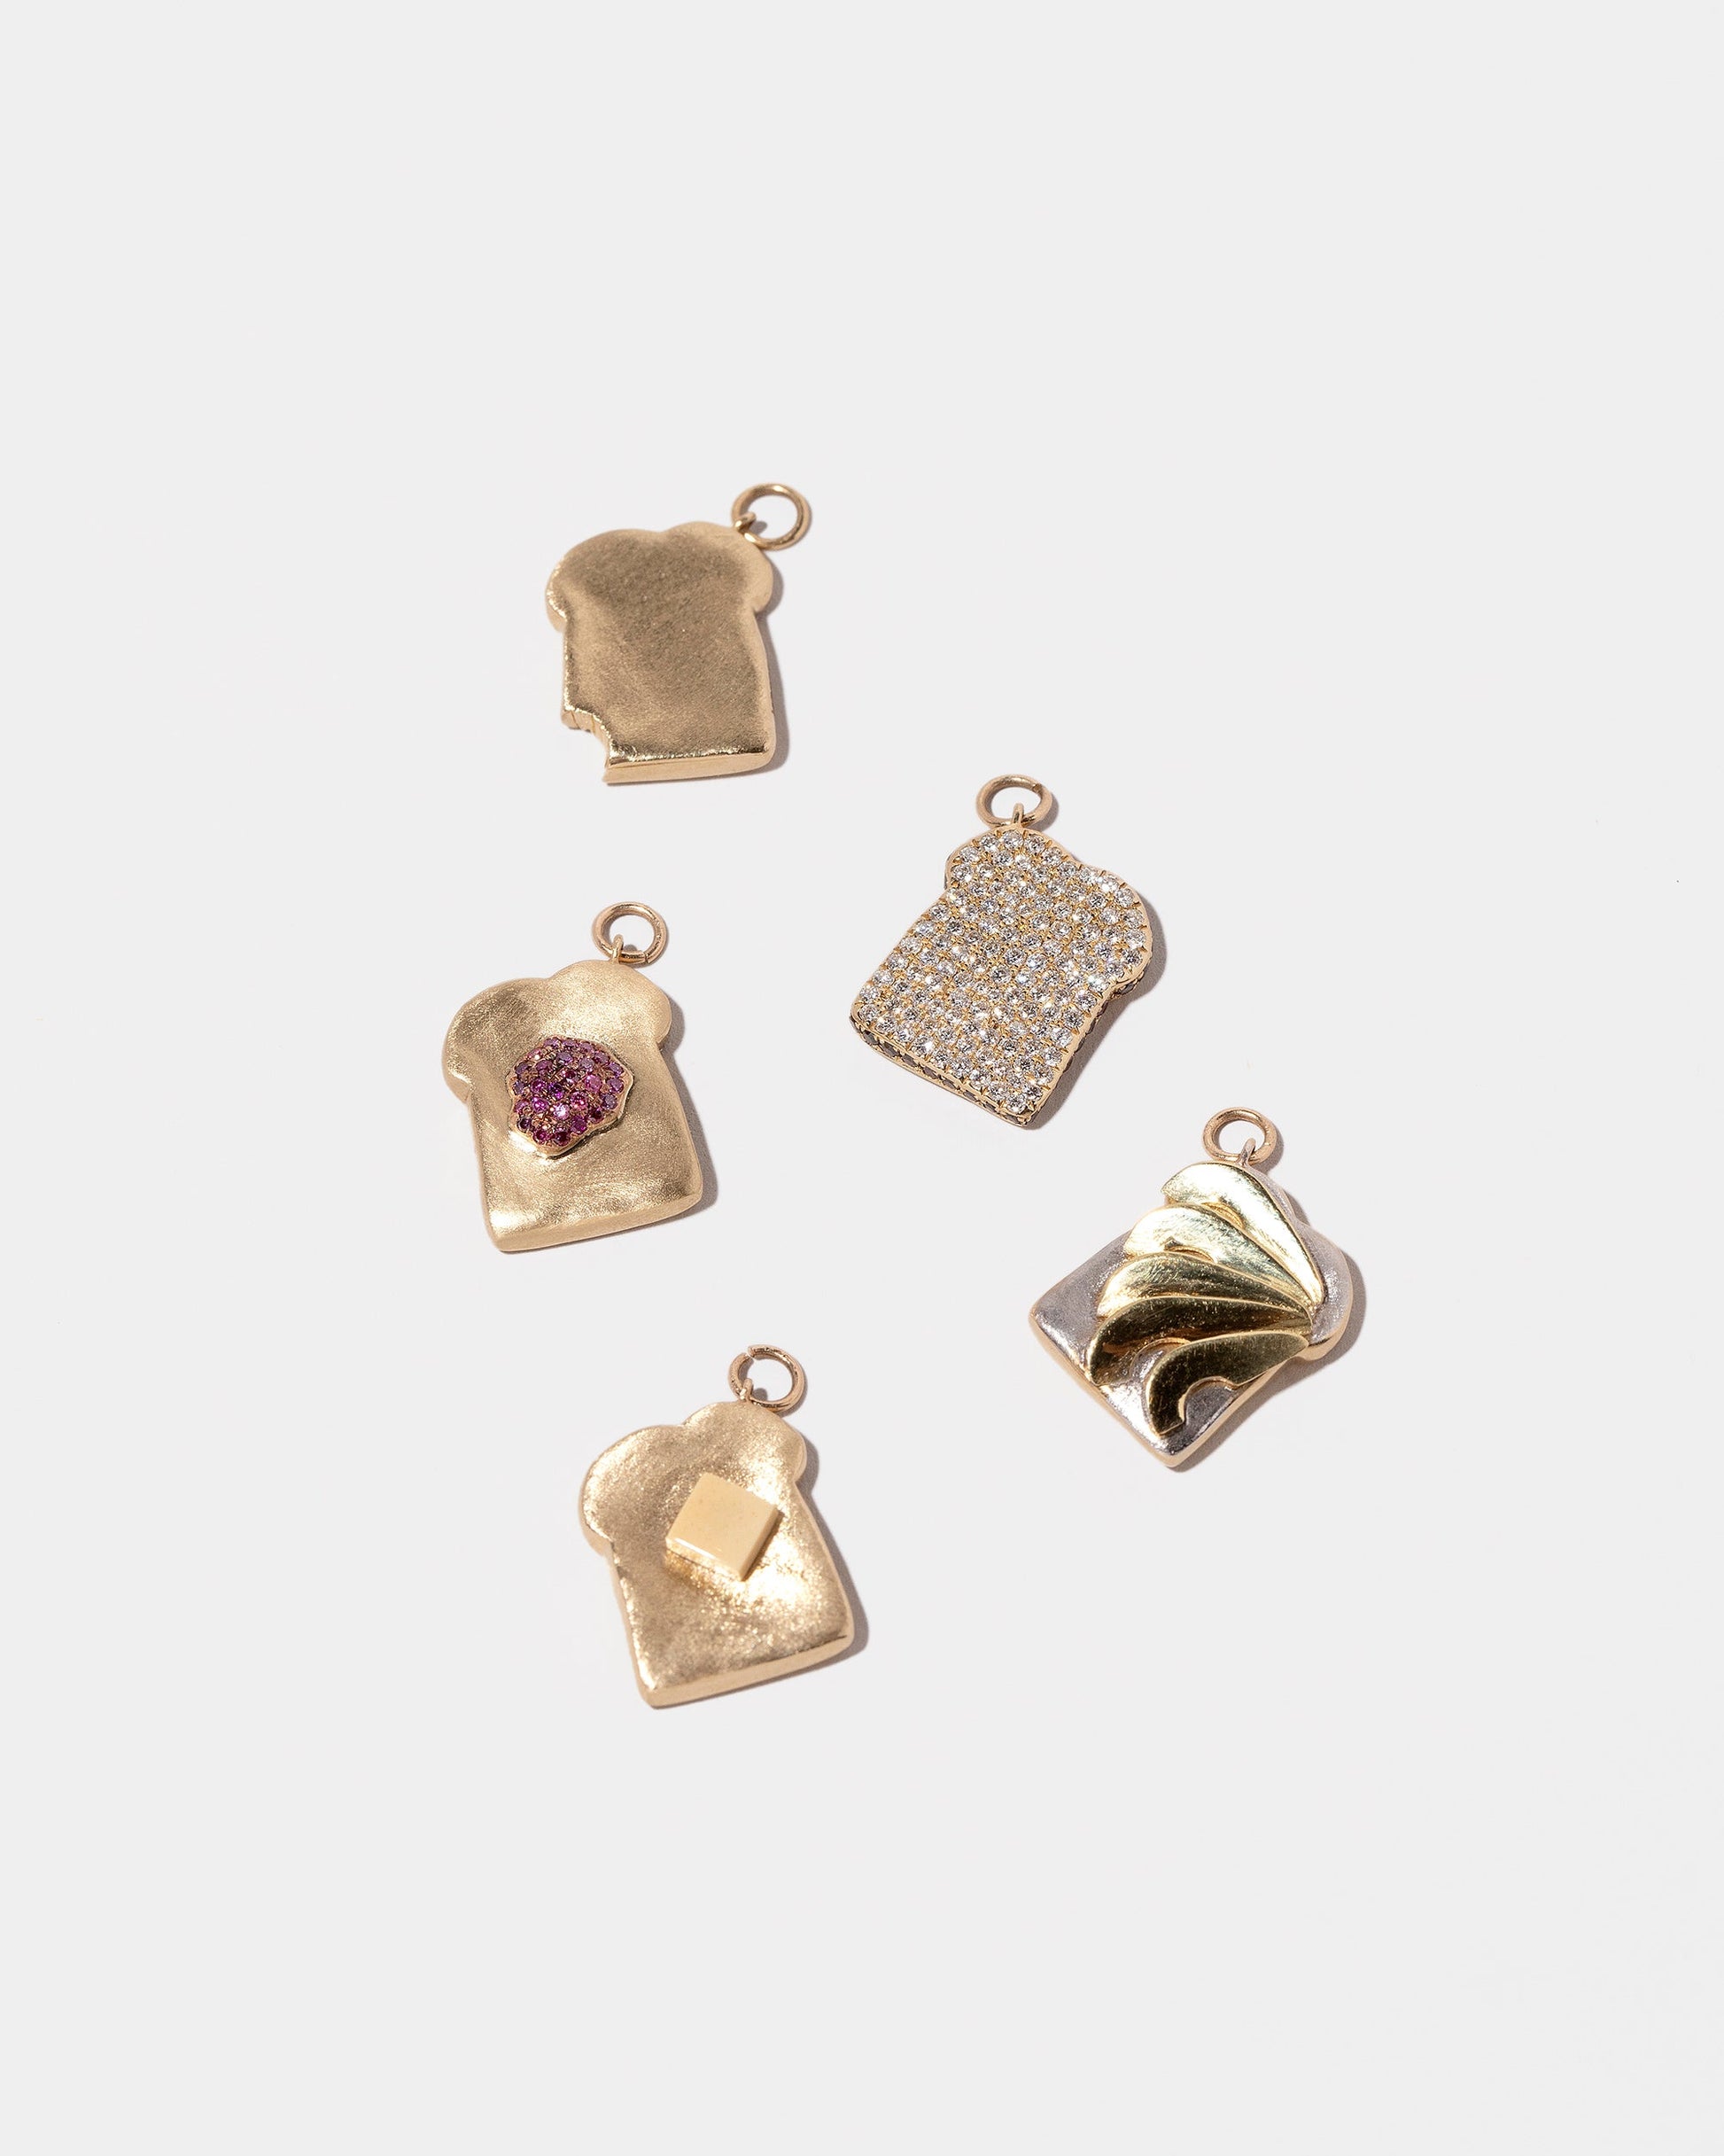 Group of Toast Charms on light colored background.